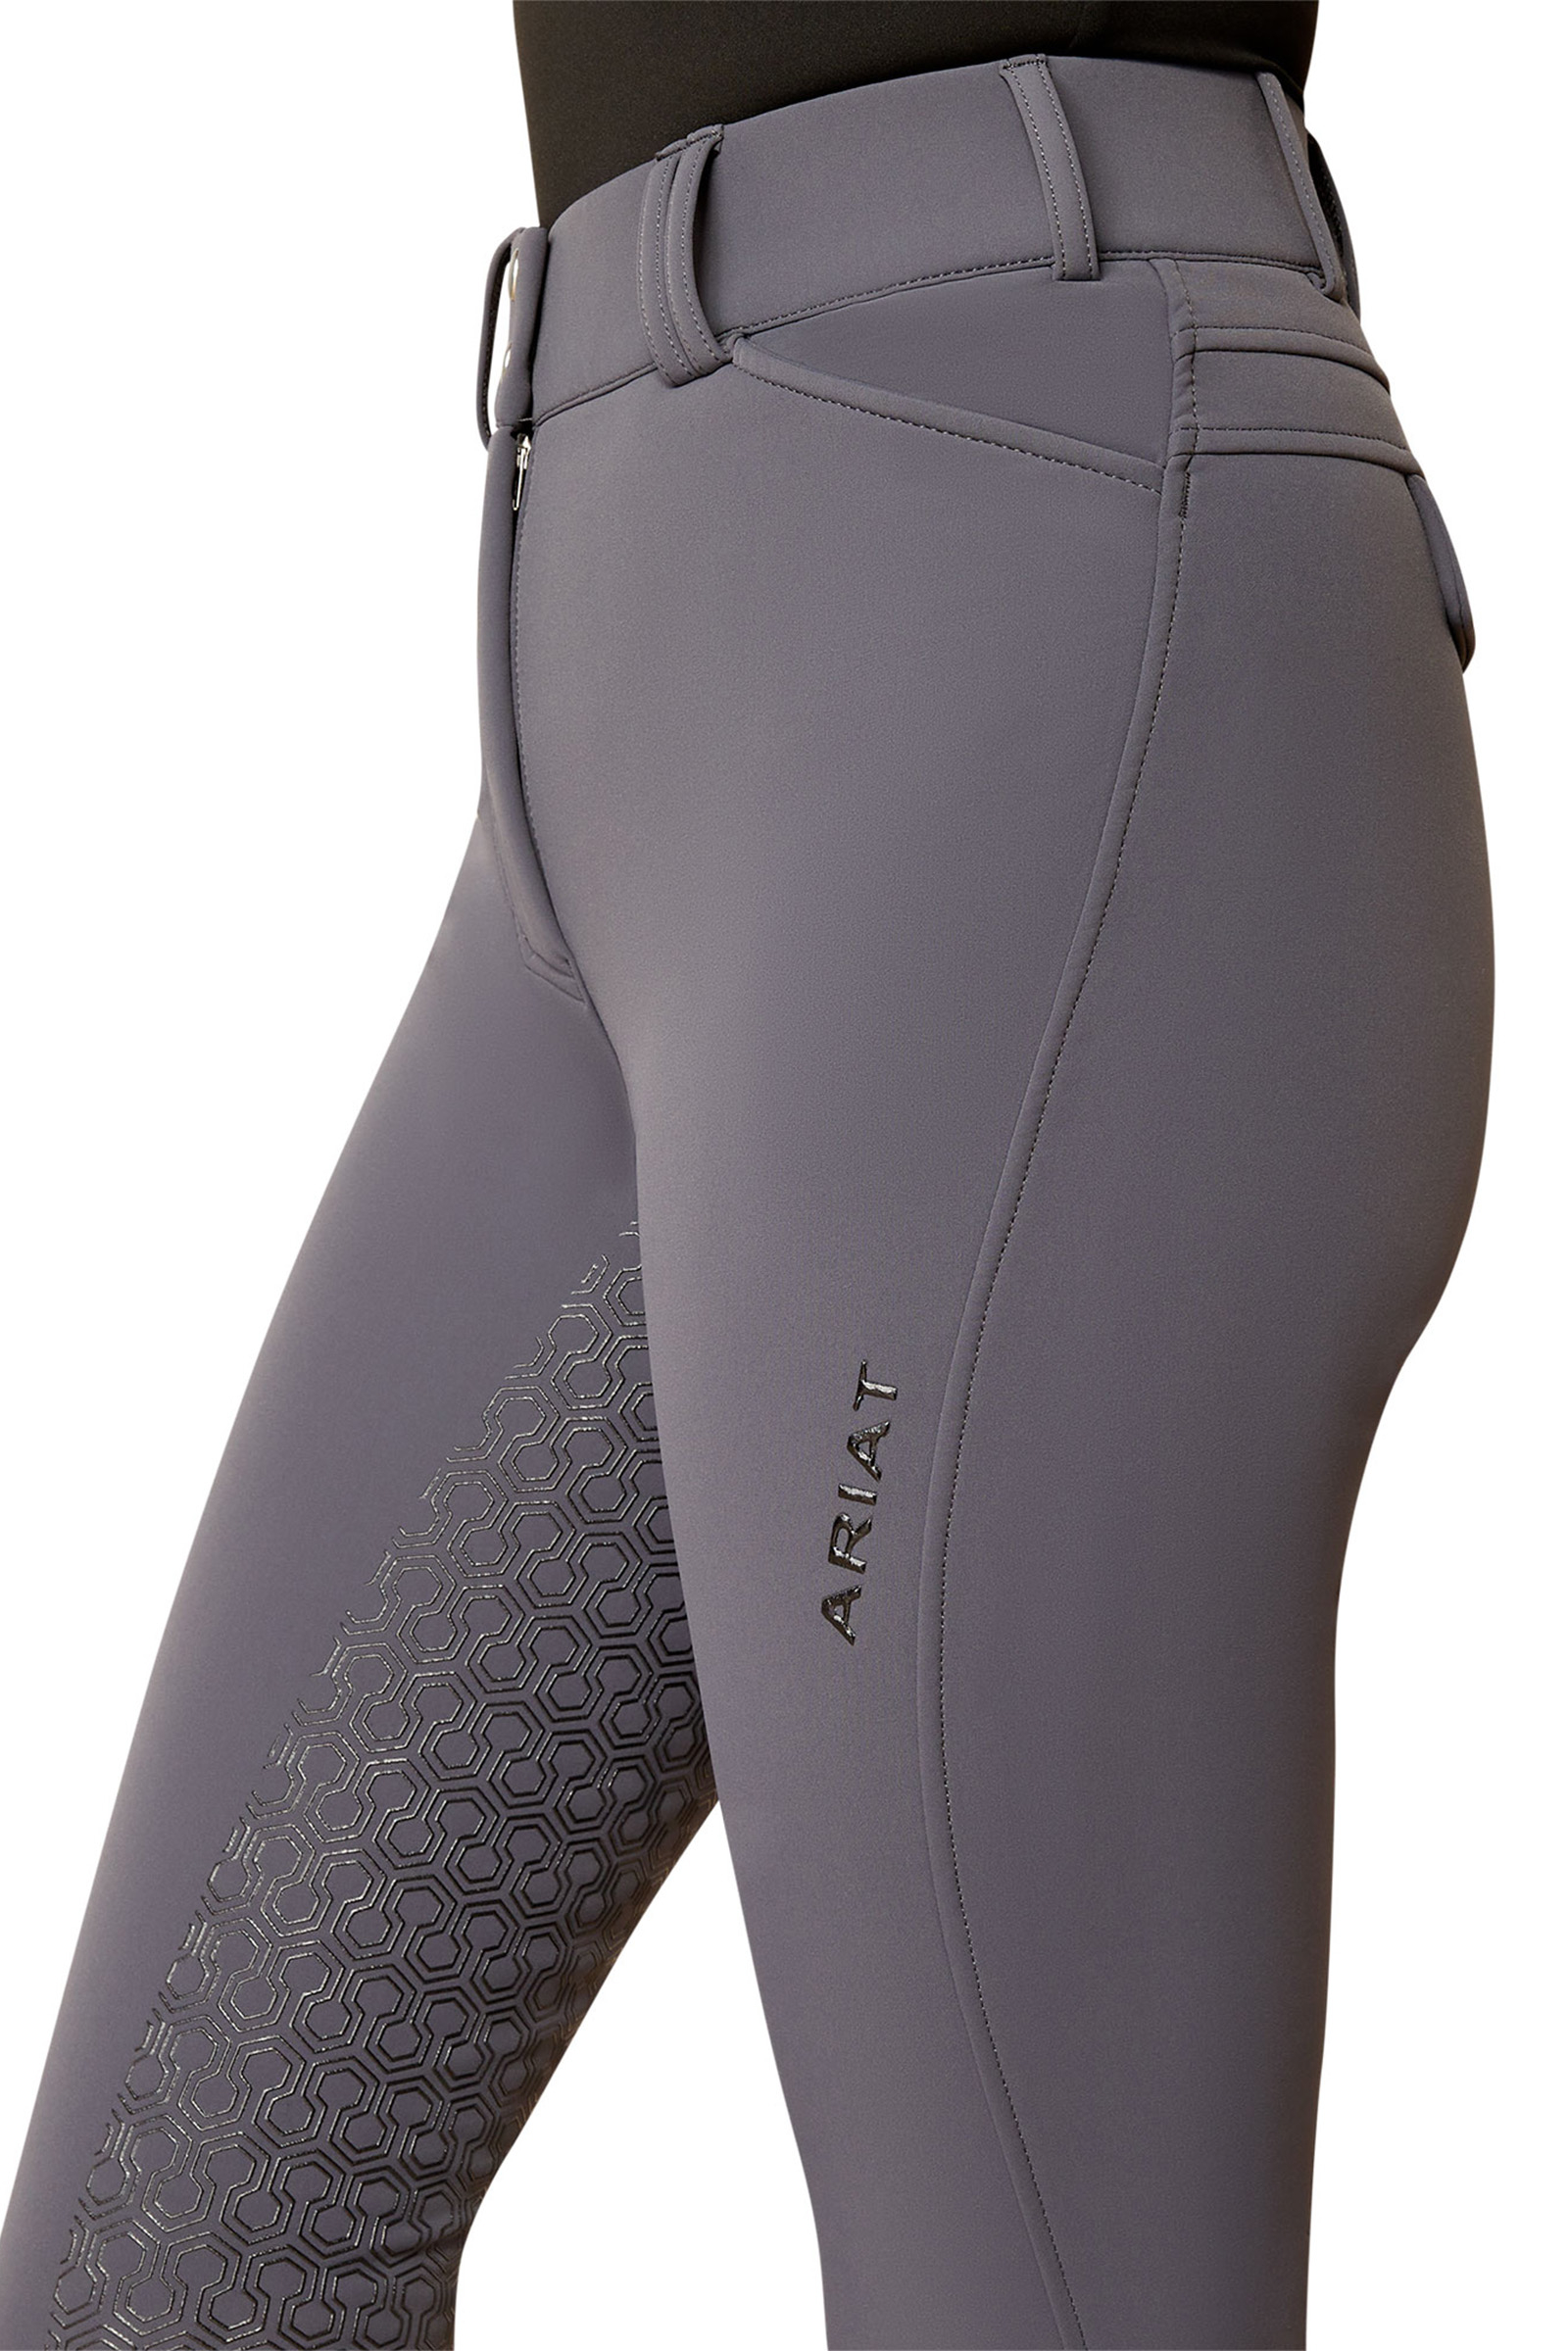 Ariat Womens Prevail Insulated Full Seat Tights - Black Reflective - For  The Rider from Oakfield